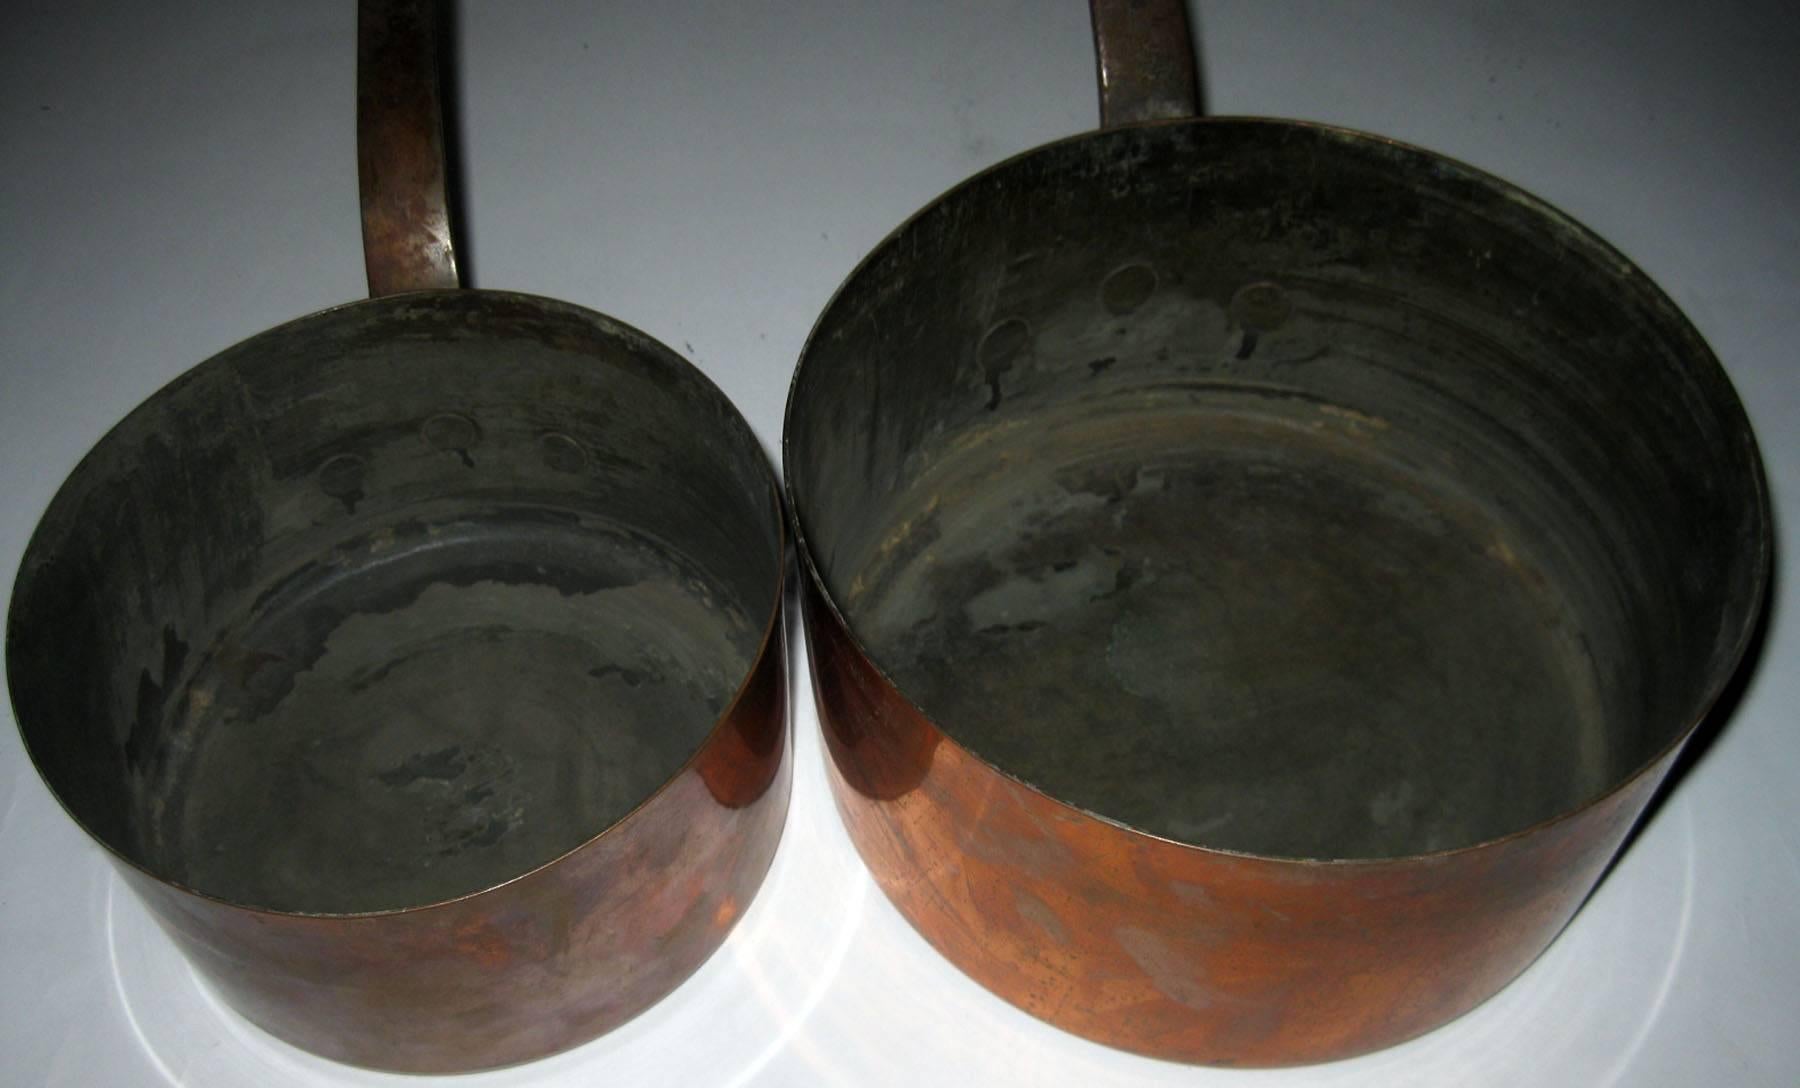 Pair of French copper sauce pans in graduated sizes featuring riveted metal handles with a slight tilt. Measure/ Large: 7.25 inches tall to top of handle, 4 inches tall to top of pan x 8 inches across pan (15.50 inches across overall). Small: 5.50